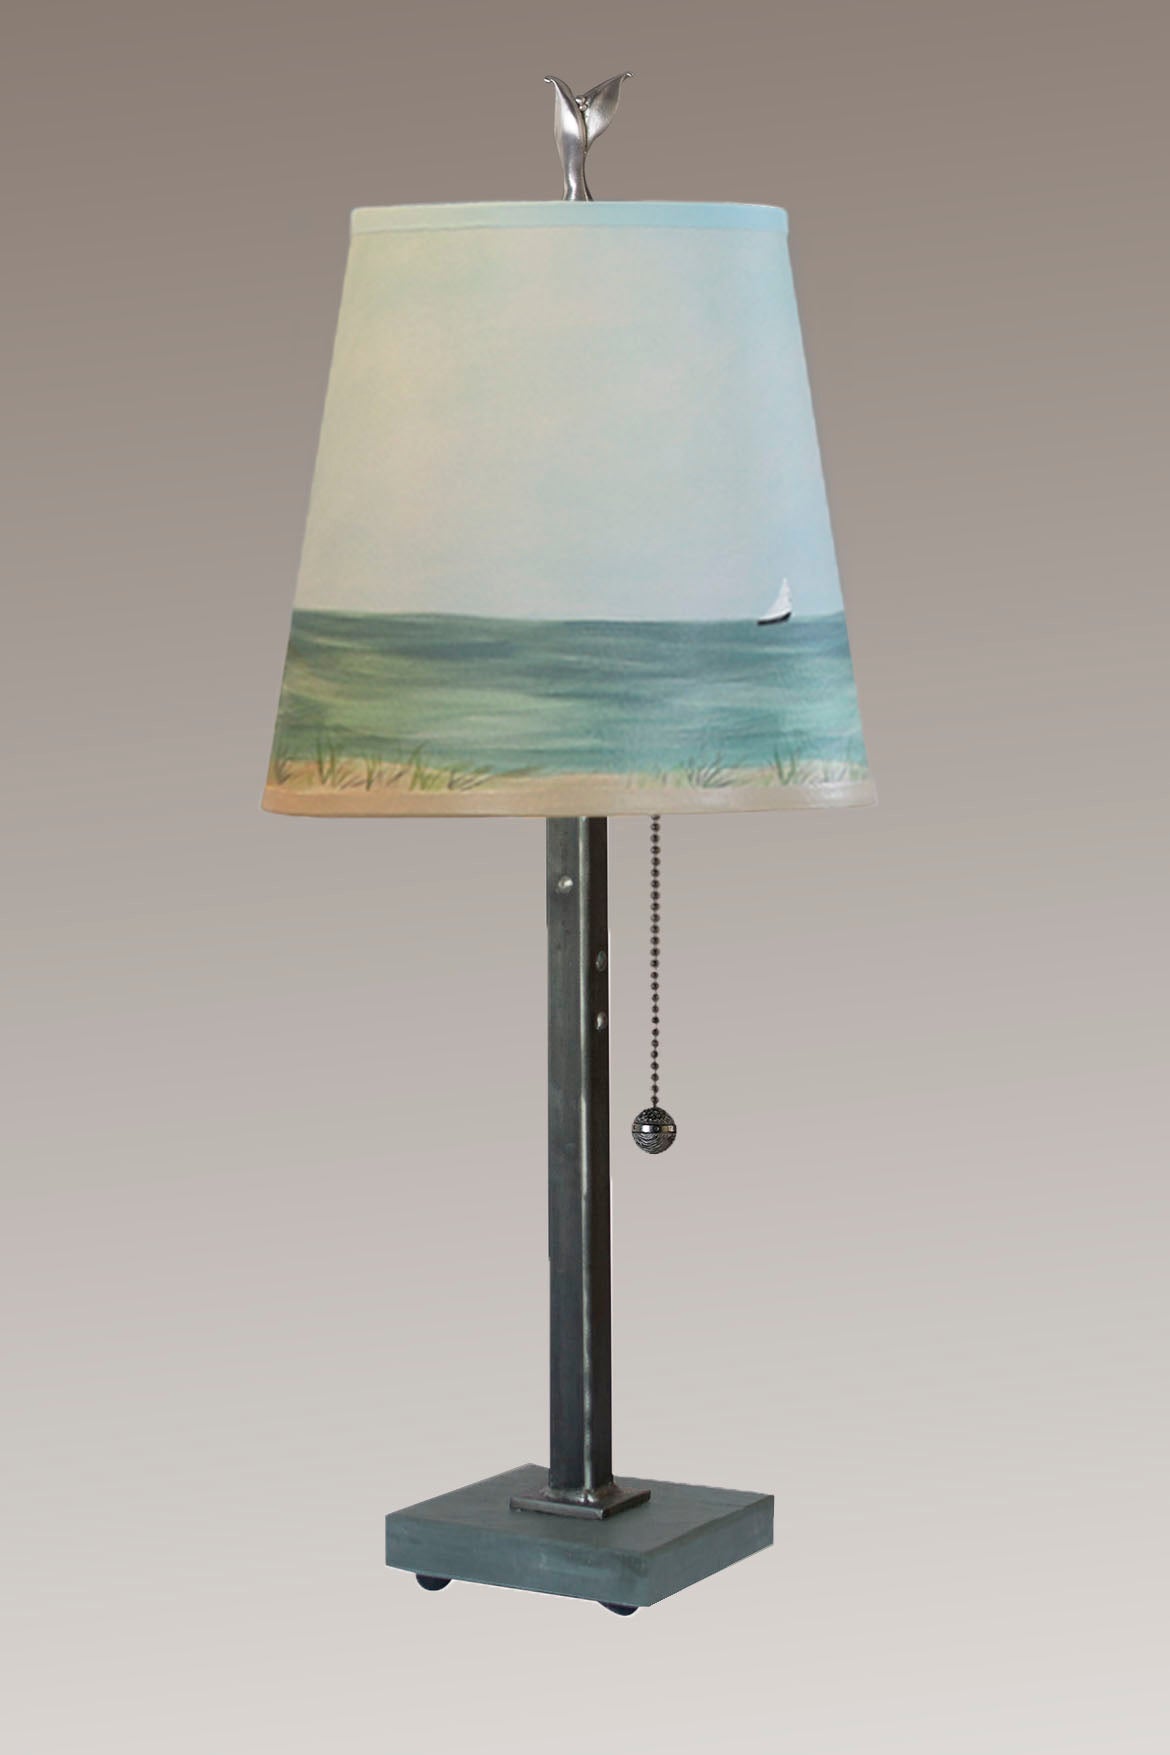 Janna Ugone &amp; Co Table Lamps Steel Table Lamp with Small Drum Shade in Shore